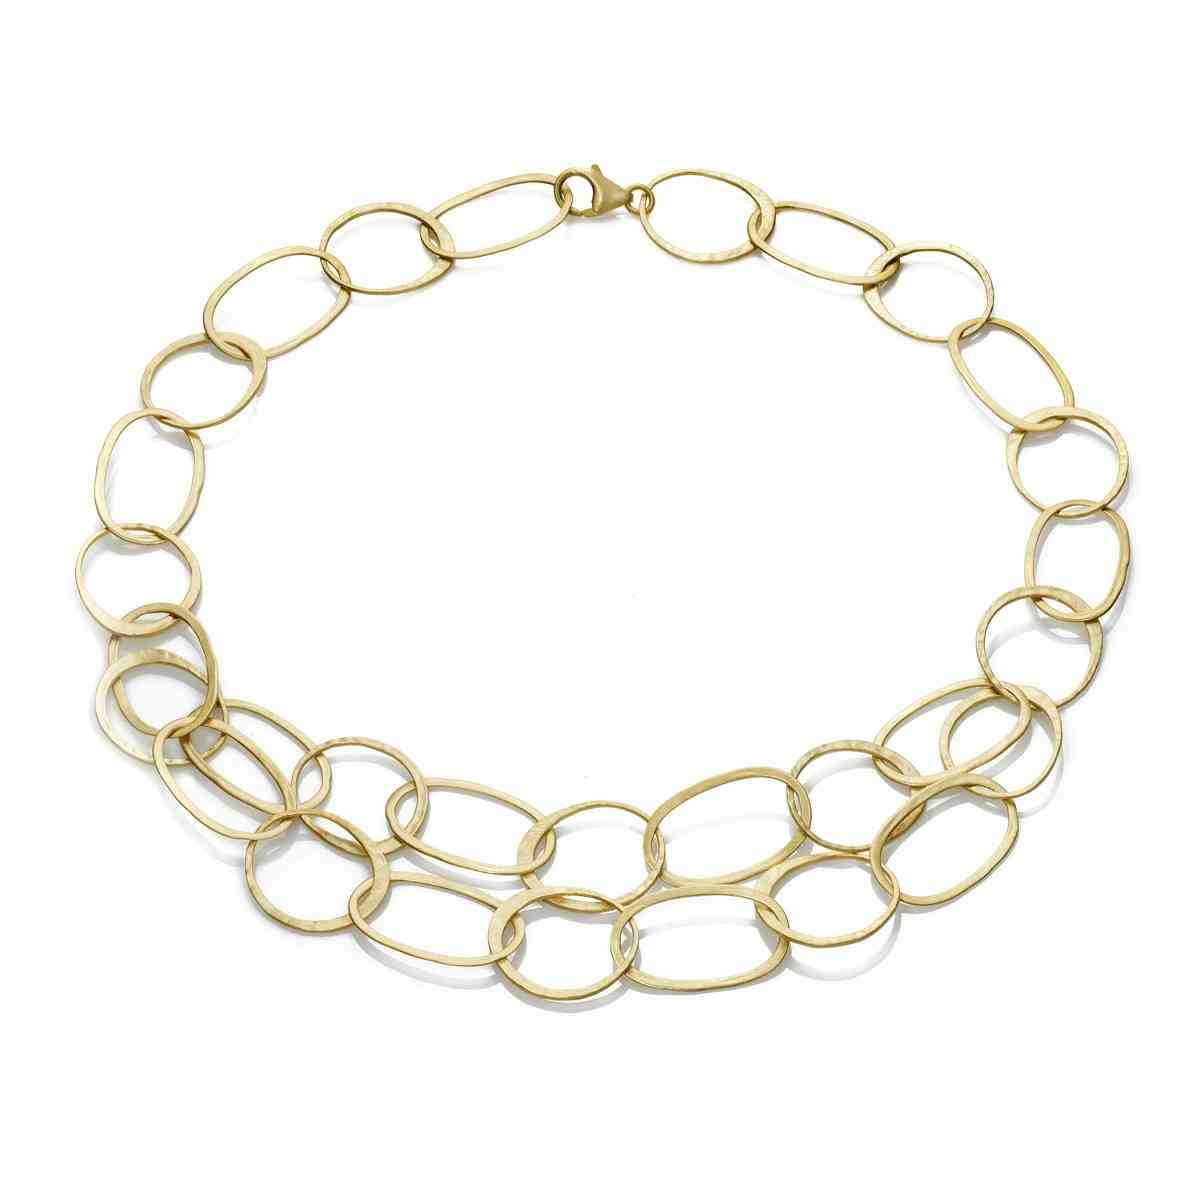 OLYMPIA Necklace in Silver. 18k Gold Vermeil